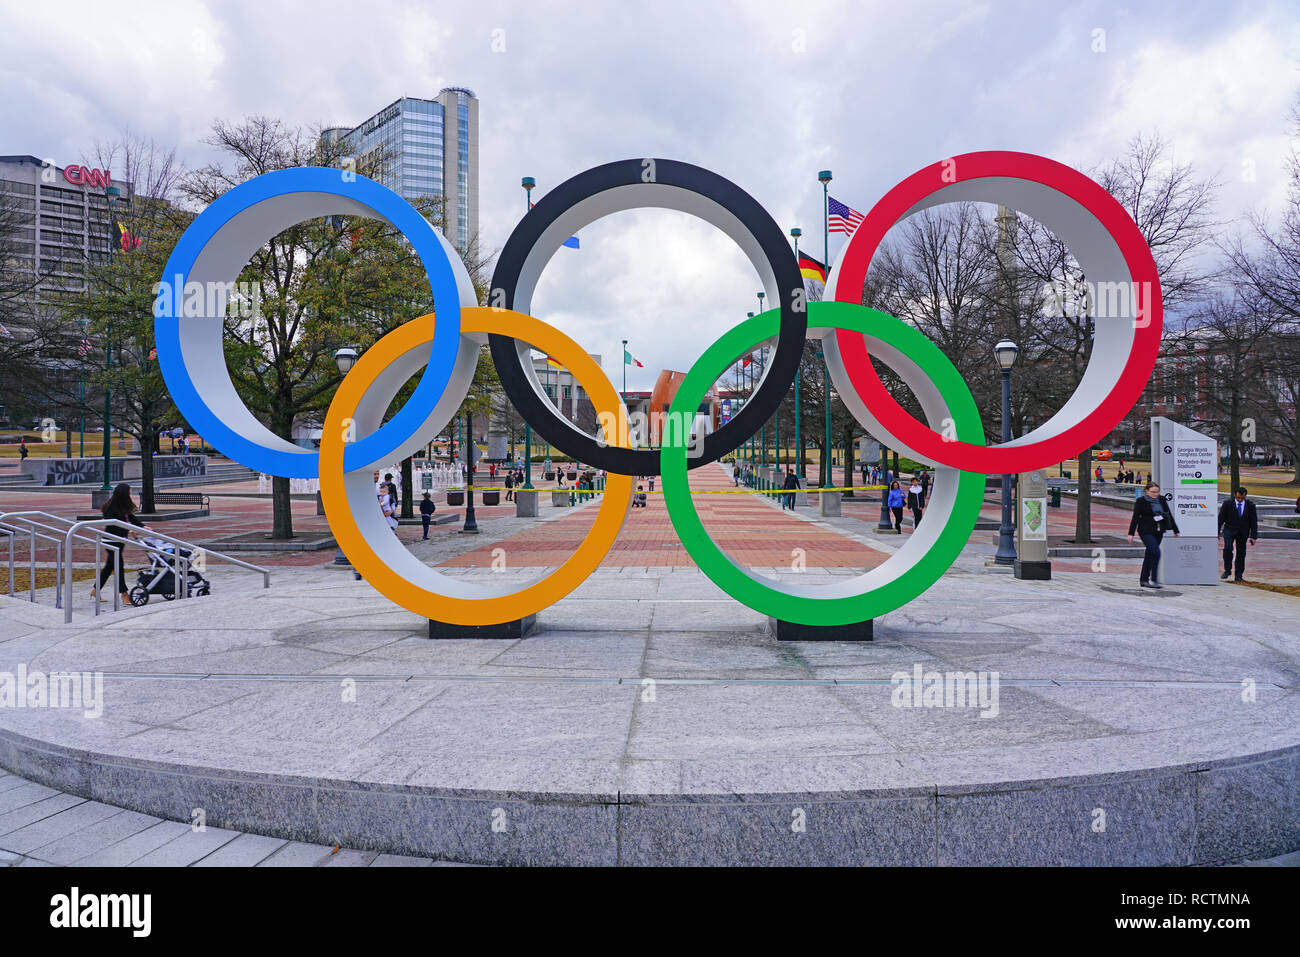 ATLANTA, GA- View of the Centennial Olympic Park, built for the 1996 Summer Olympics, located in downtown Atlanta, Georgia. Stock Photo